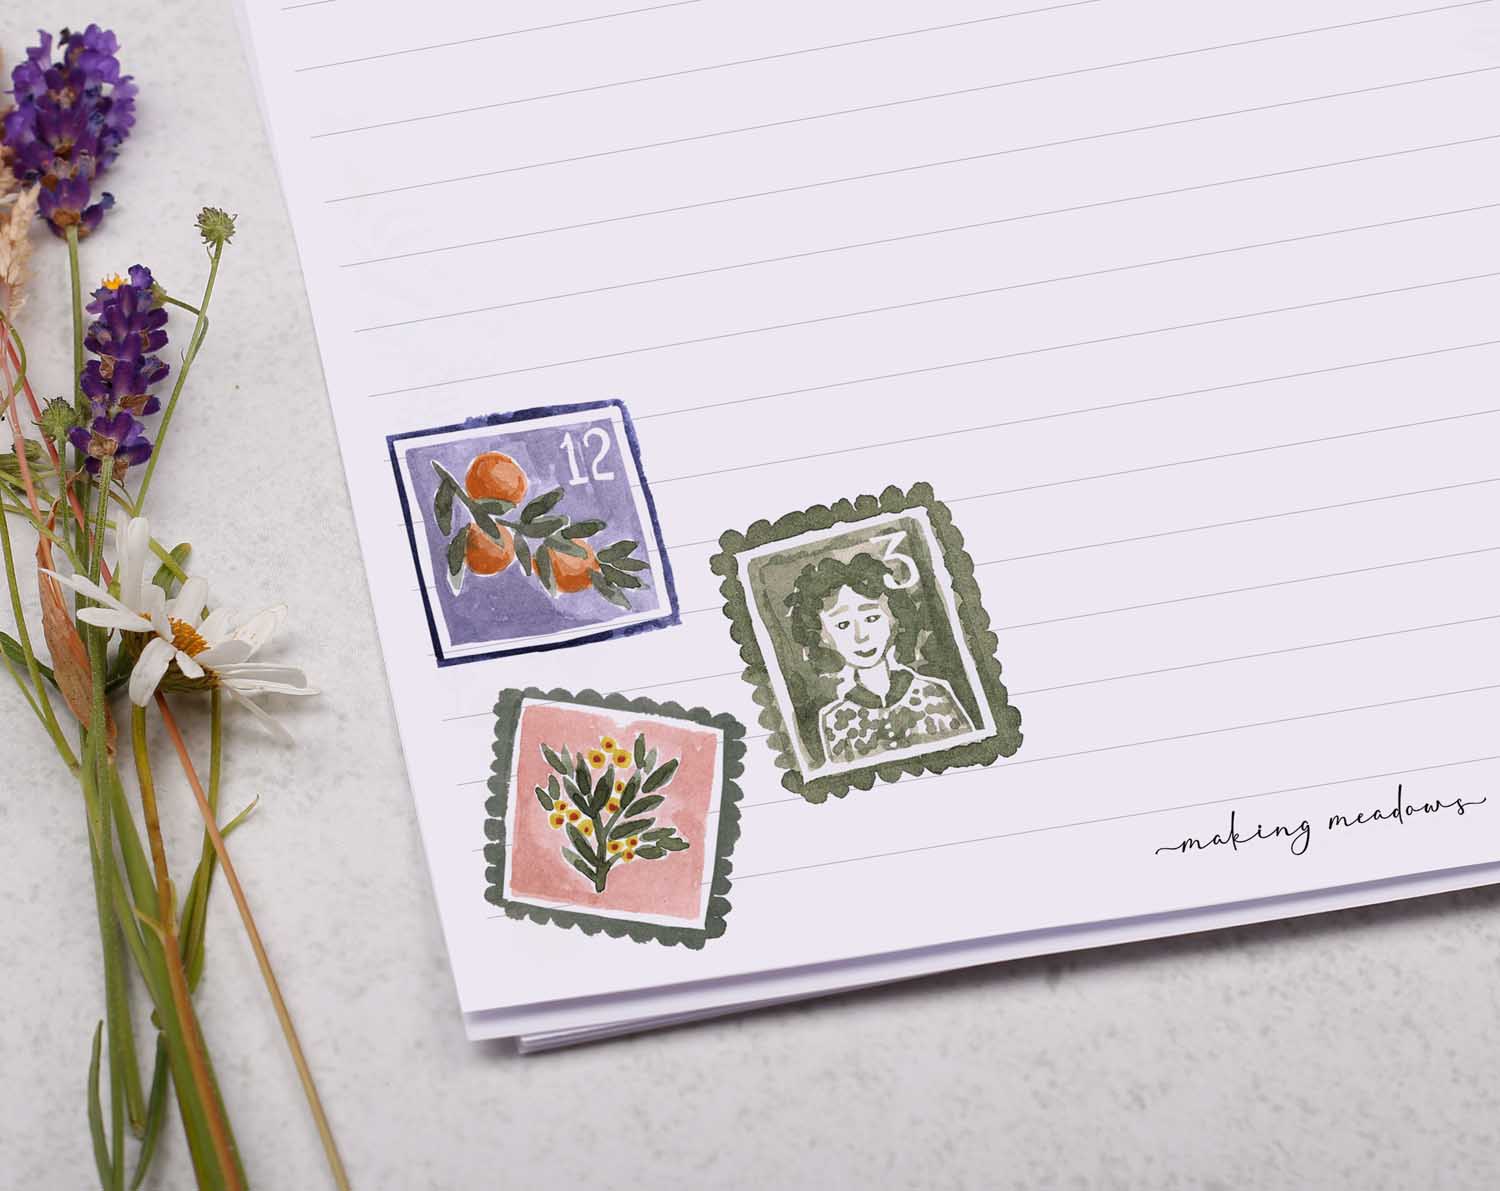 A4 letter writing paper sheets with a pretty scattering of floral postage stamps. The delicate floral watercolour stamp designs cascade around the letter paper edge.